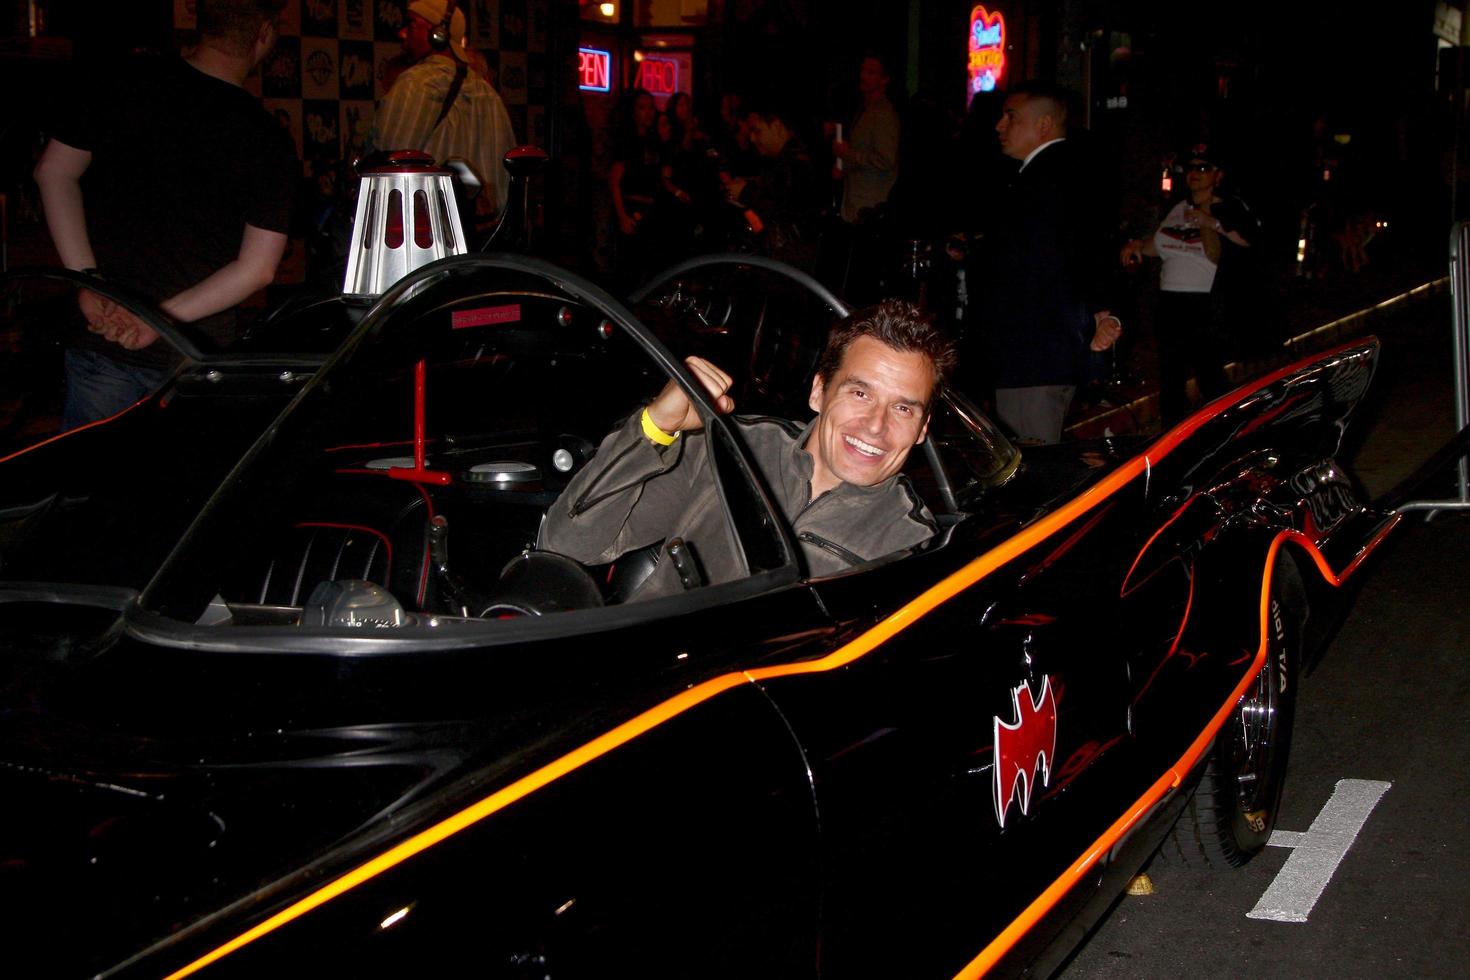 LOS ANGELES - MAR 21 - Antonio Sabato Jr. in the Batmobile at the Batman Product Line Launch at the Meltdown Comics on March 21, 2013 in Los Angeles, CA photo